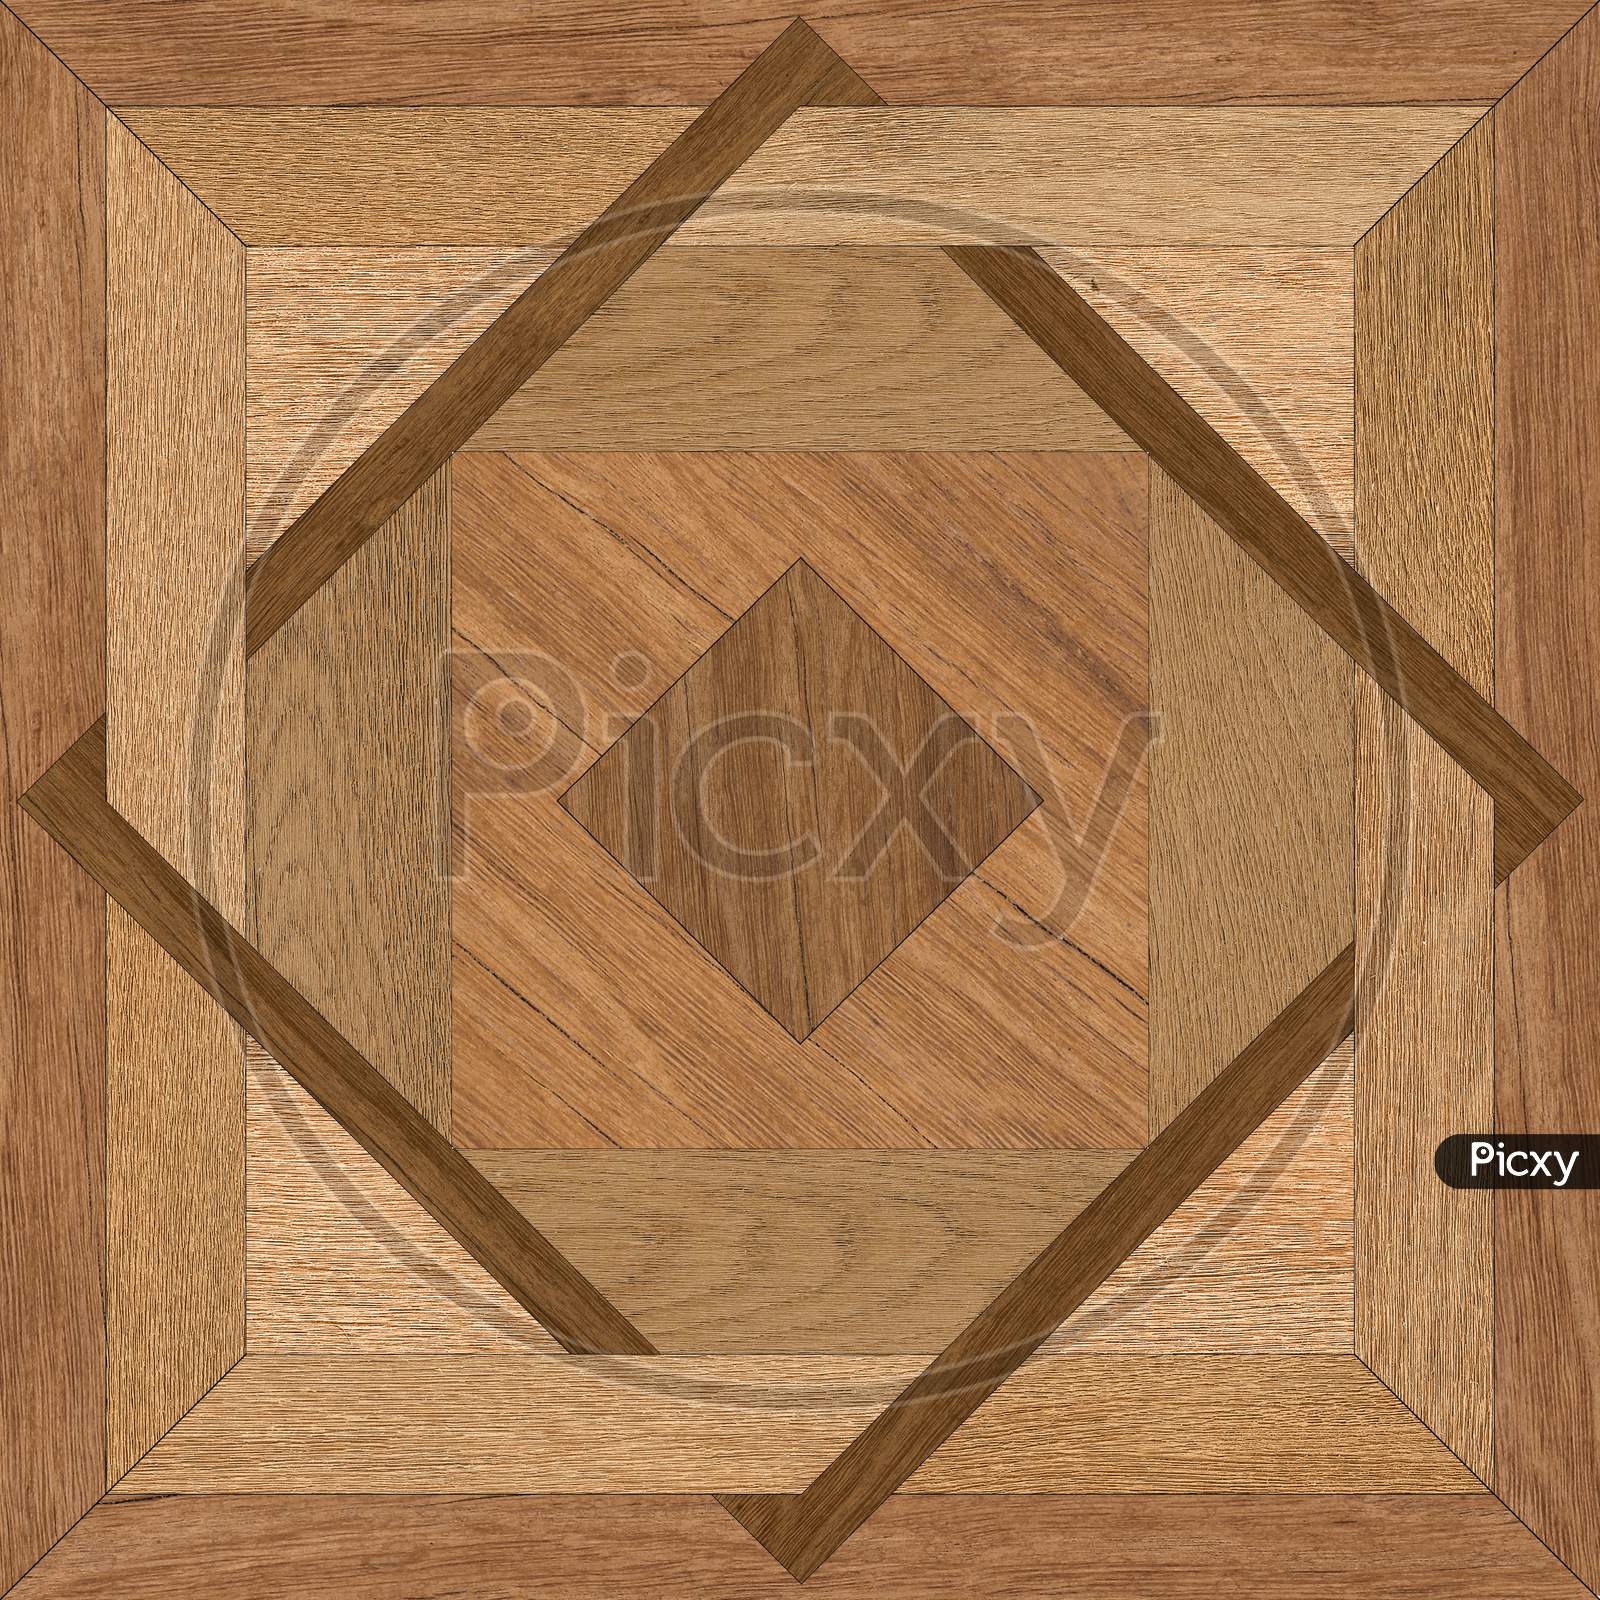 Geometric Pattern Floor And Wall Decorative Wooden Tile Texture.